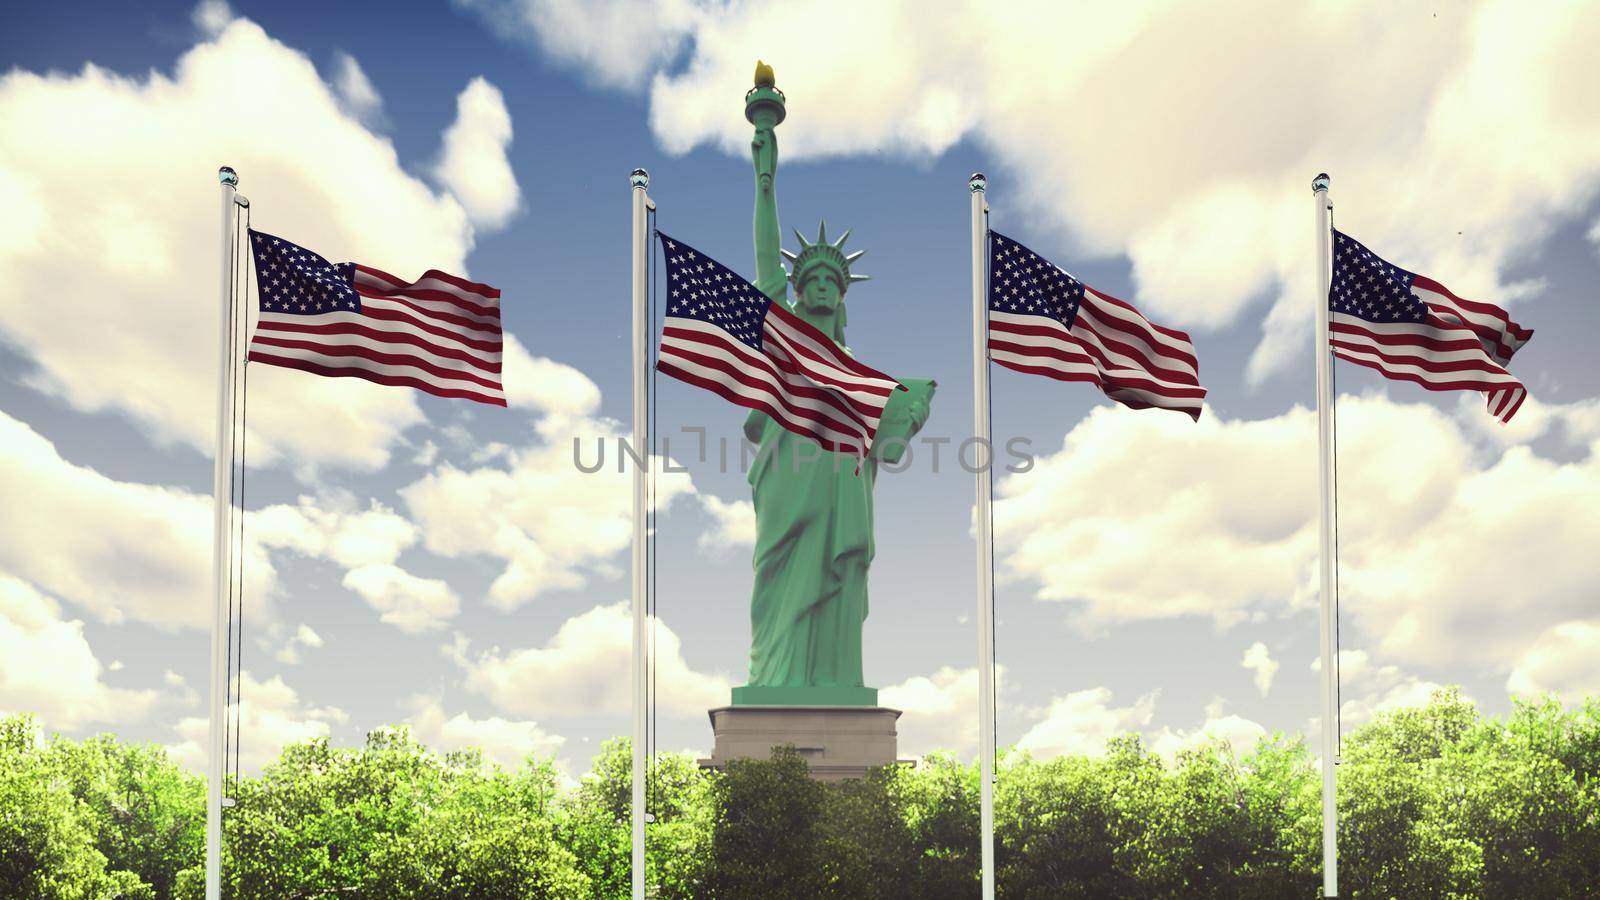 The American flags flutters in the wind on a Sunny day against the blue sky and the Statue of Liberty. 3D Rendering by designprojects